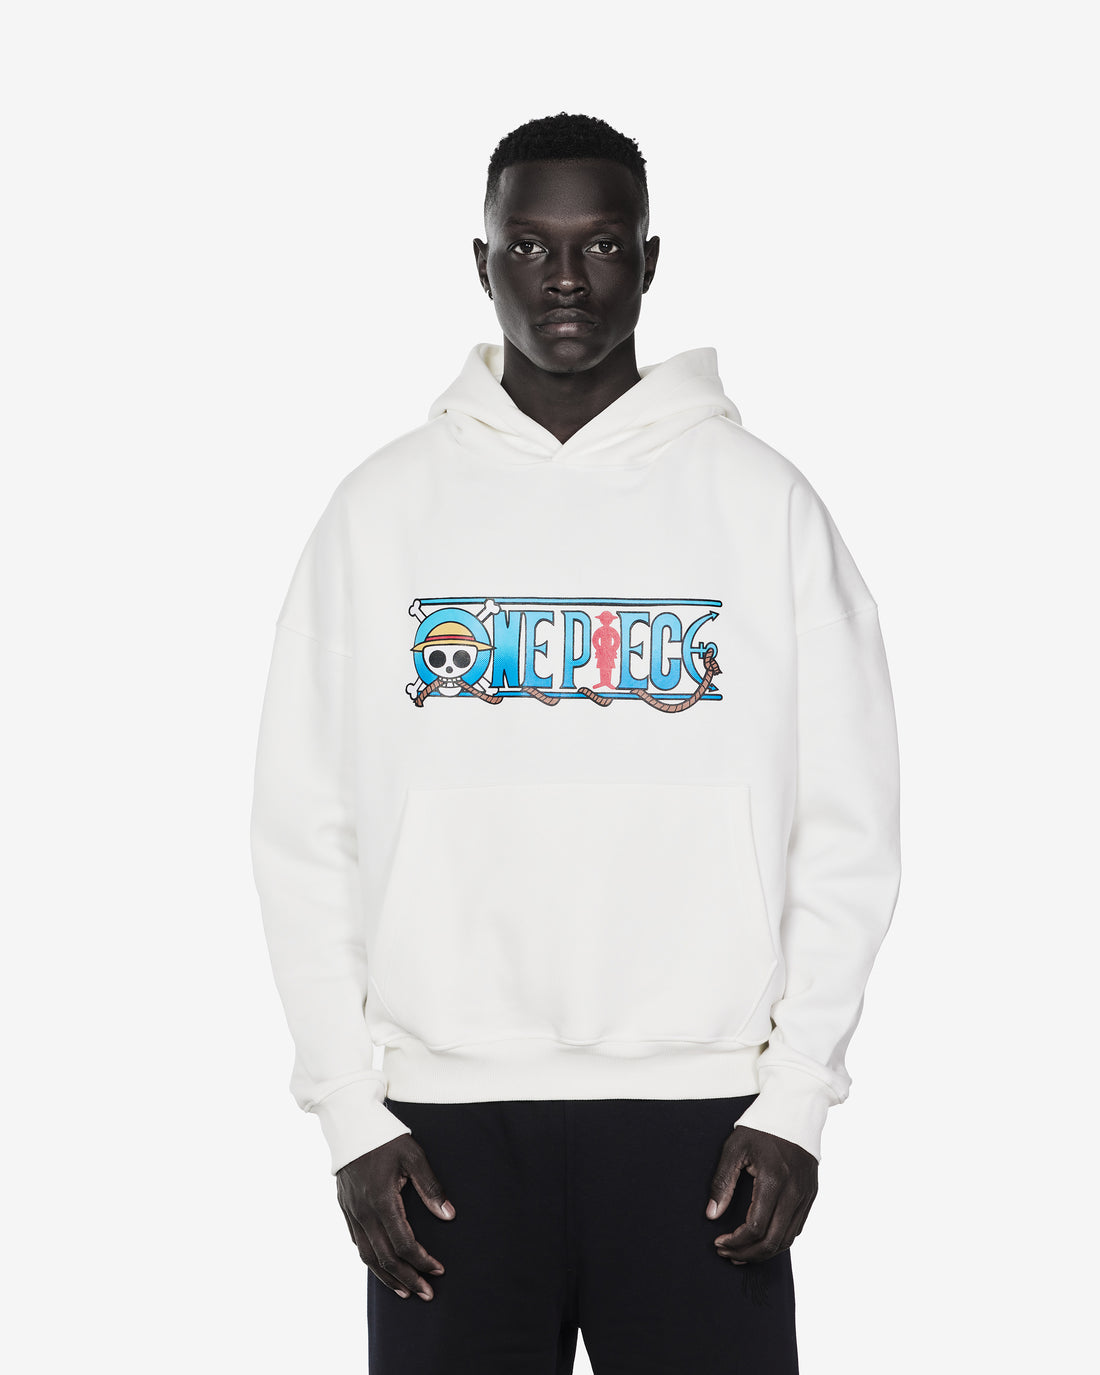 One Piece With Back Printed Hoodie